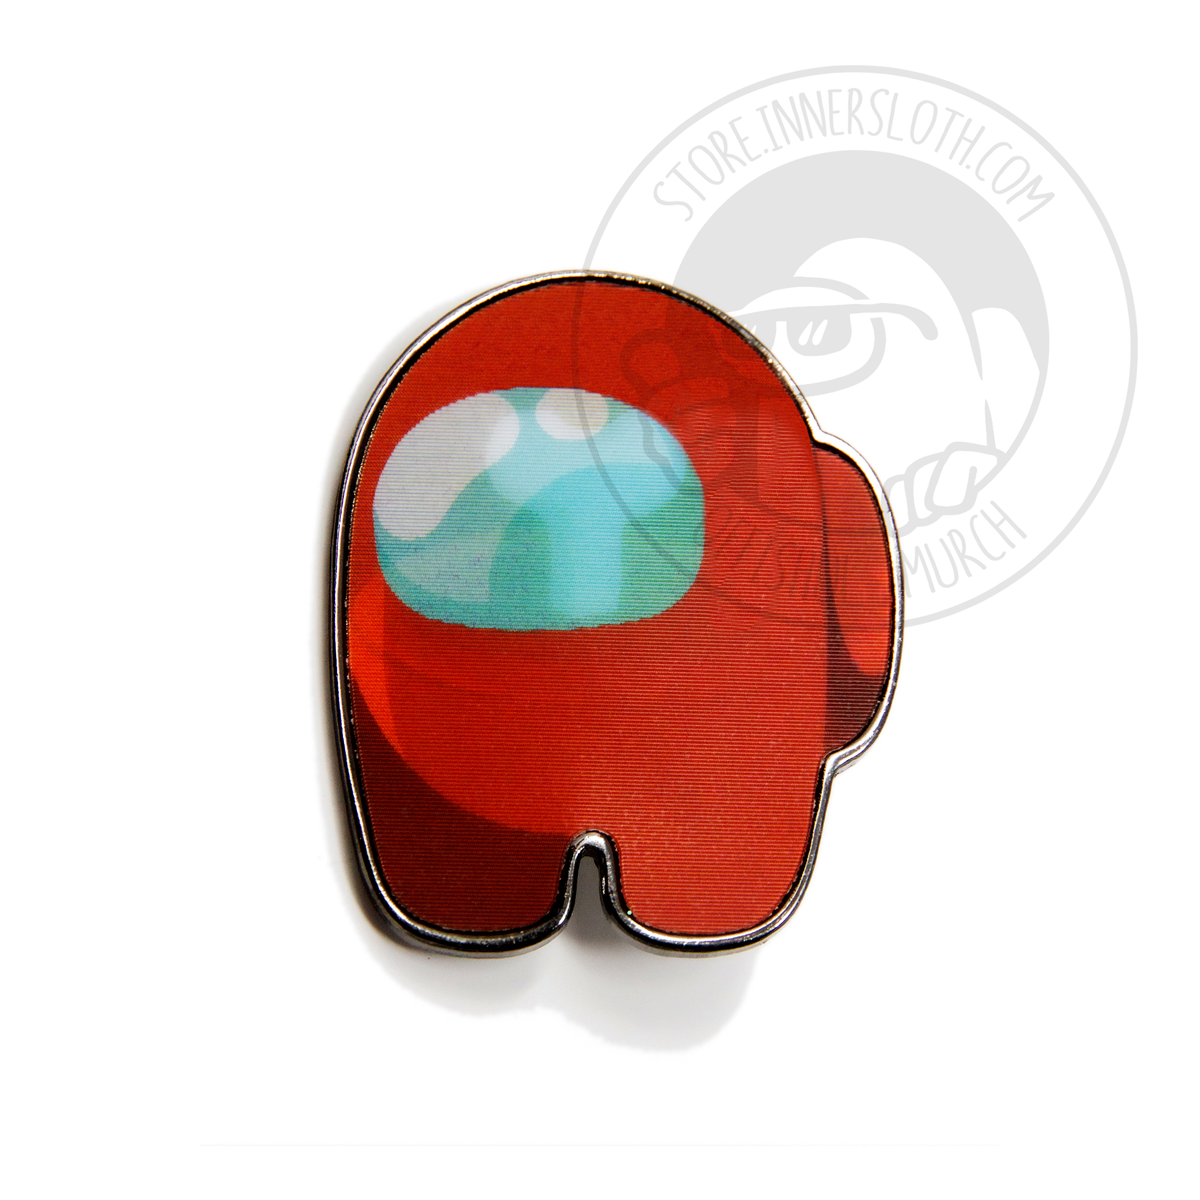 A still image of the Among Us: Lenticular Impostor Pin in Red.